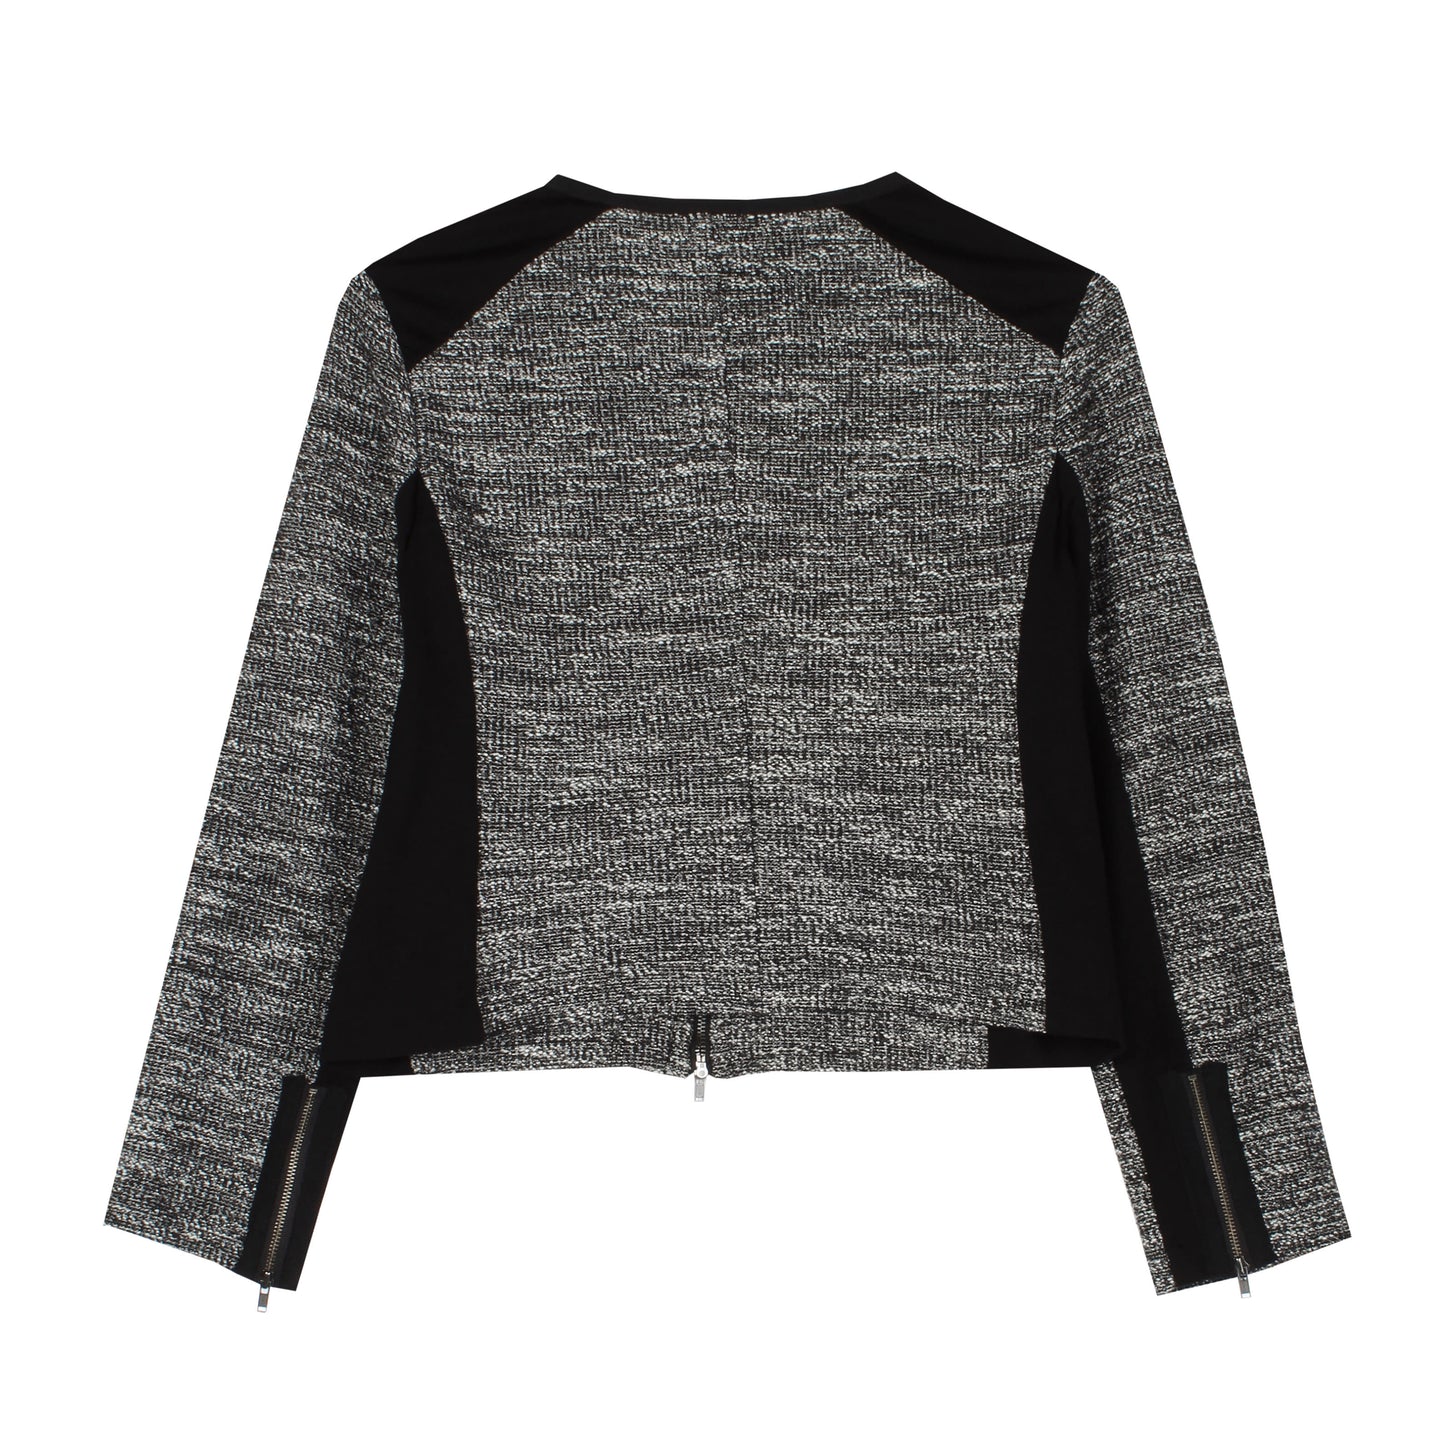 Tweedy Knitted Cotton Jacket